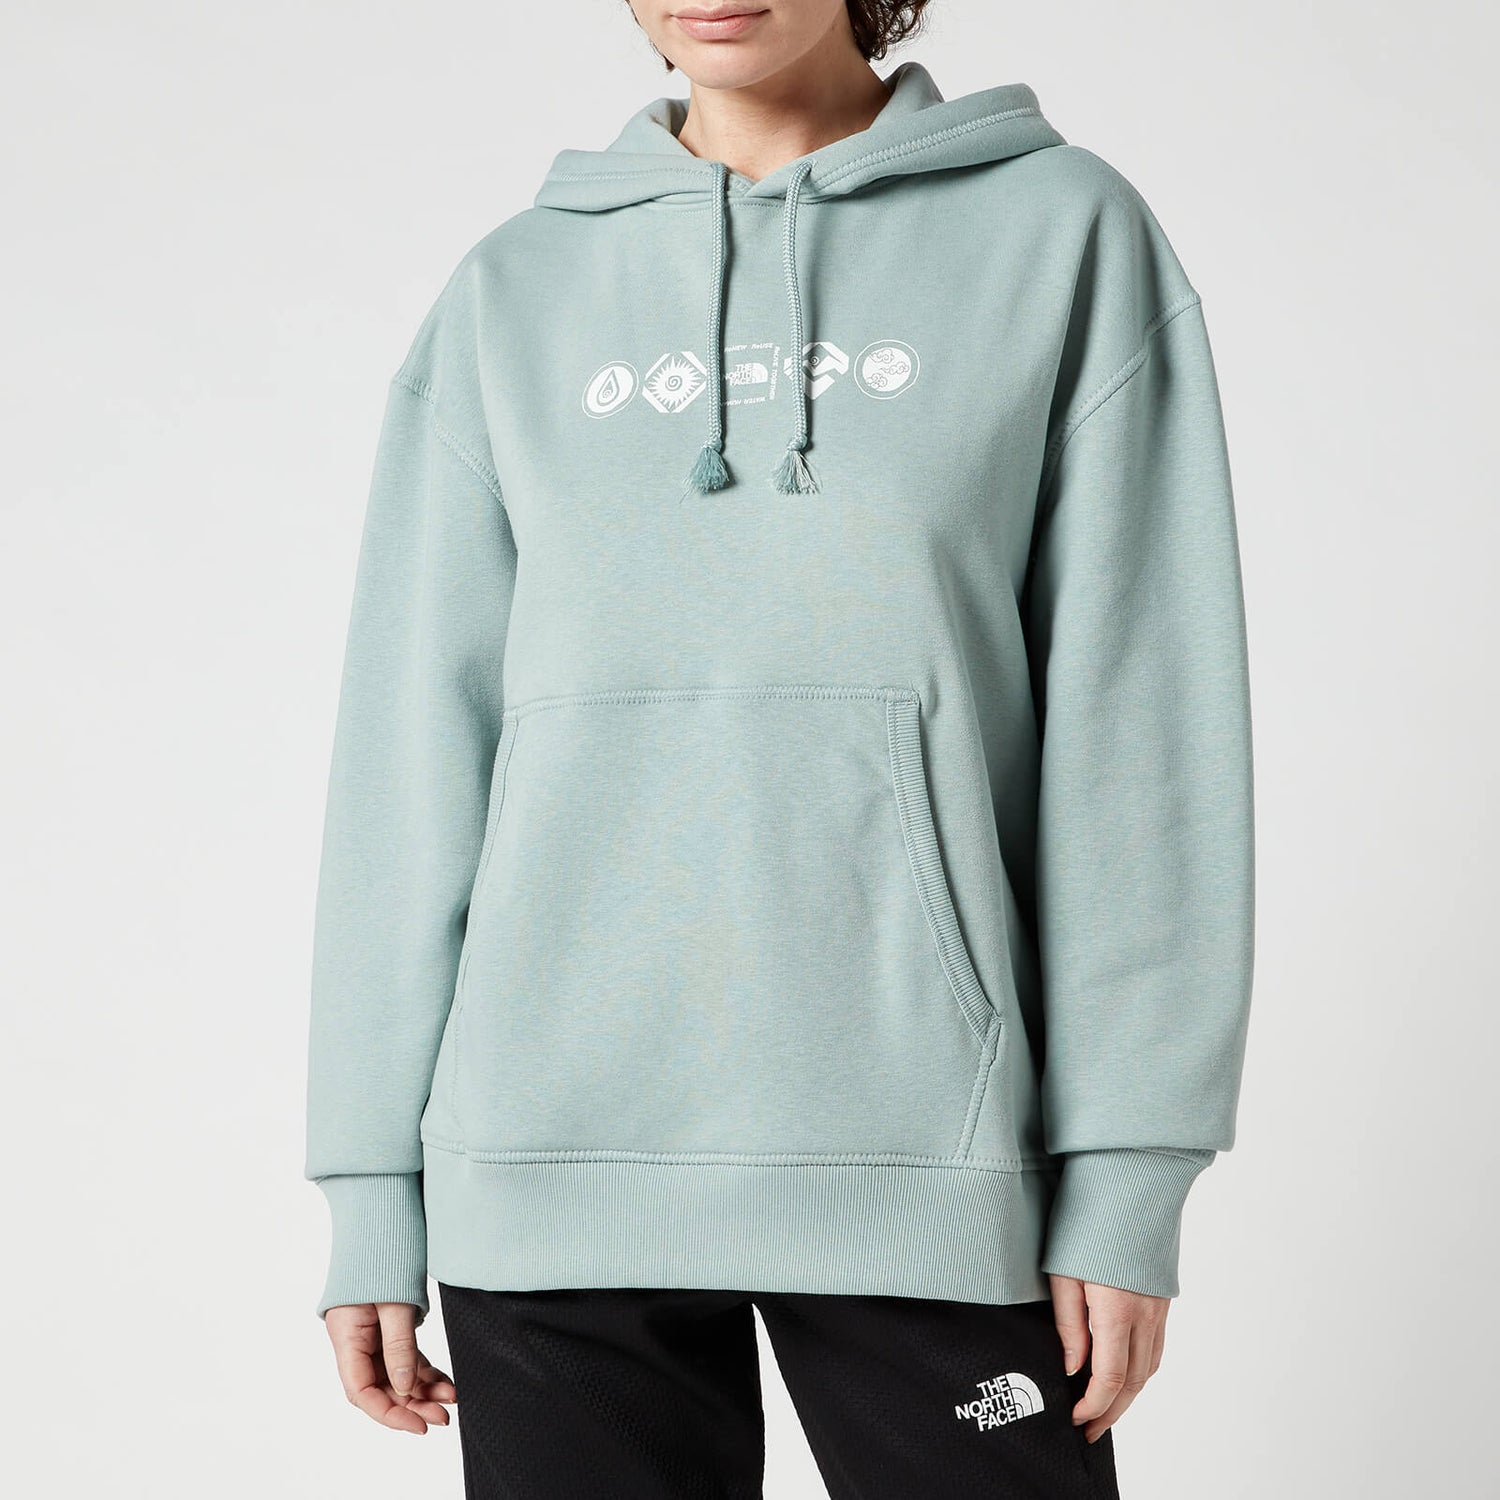 The North Face Women's Himalayan Bottle Source Pullover Hoodie - Light Green - XS